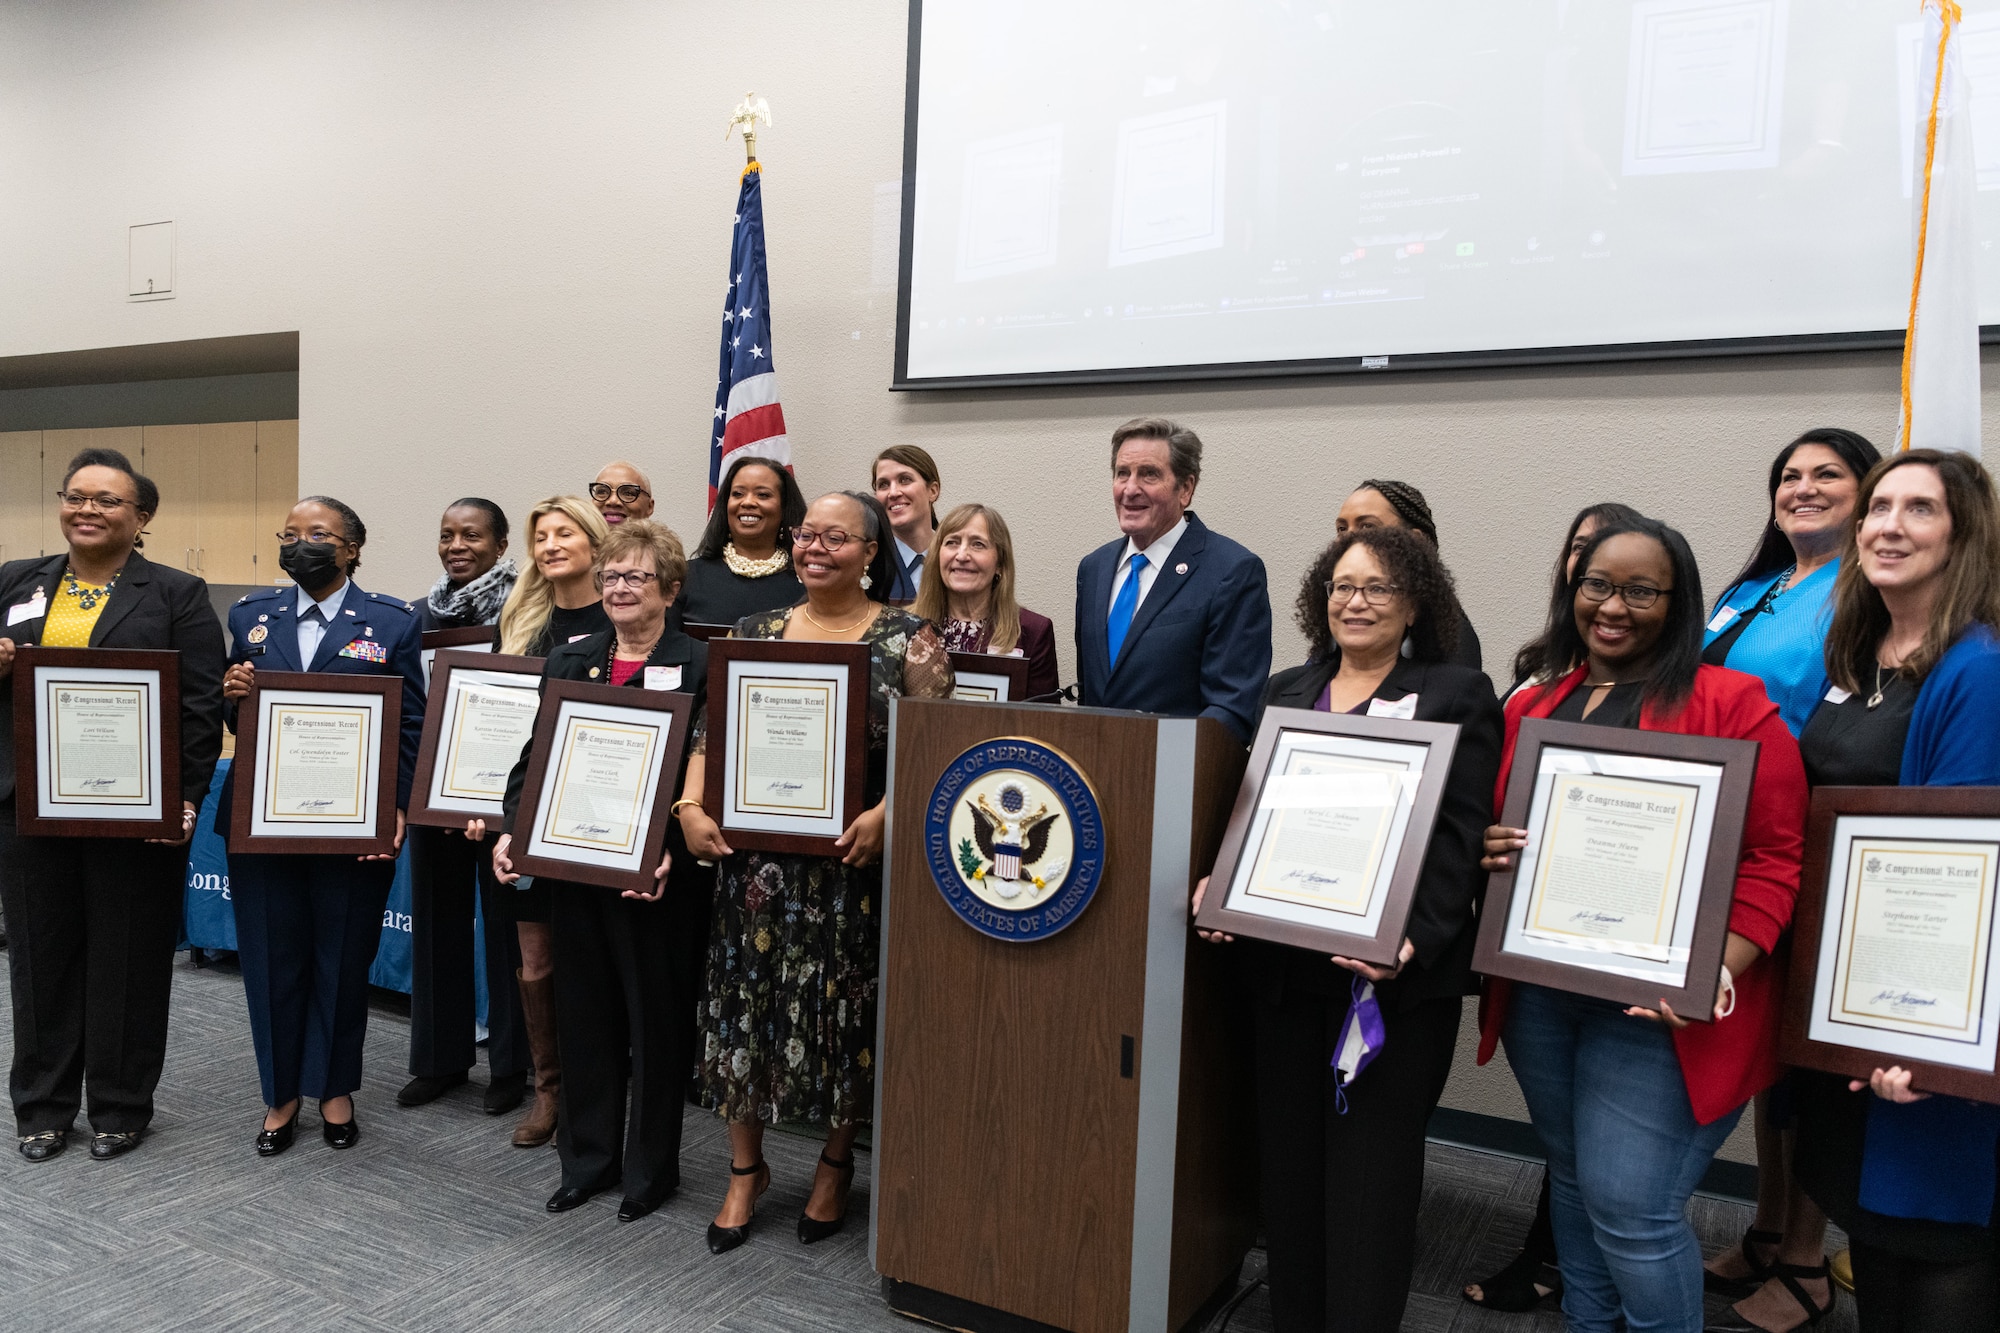 Awardees of the California’s 3rd Congressional District’s “Women of the Year” award pose for photos with Congressman John Garamendi, Nov. 9, 2021, at the Woodland Community College. Among the winners of this award was Col. Gwendolyn Foster, 60th Medical Group commander receives  and Col. Erin Cook, 349th Maintenance Group commander here at Travis Air Force Base, California. (U.S. Air Force Photo by Grant Okubo)